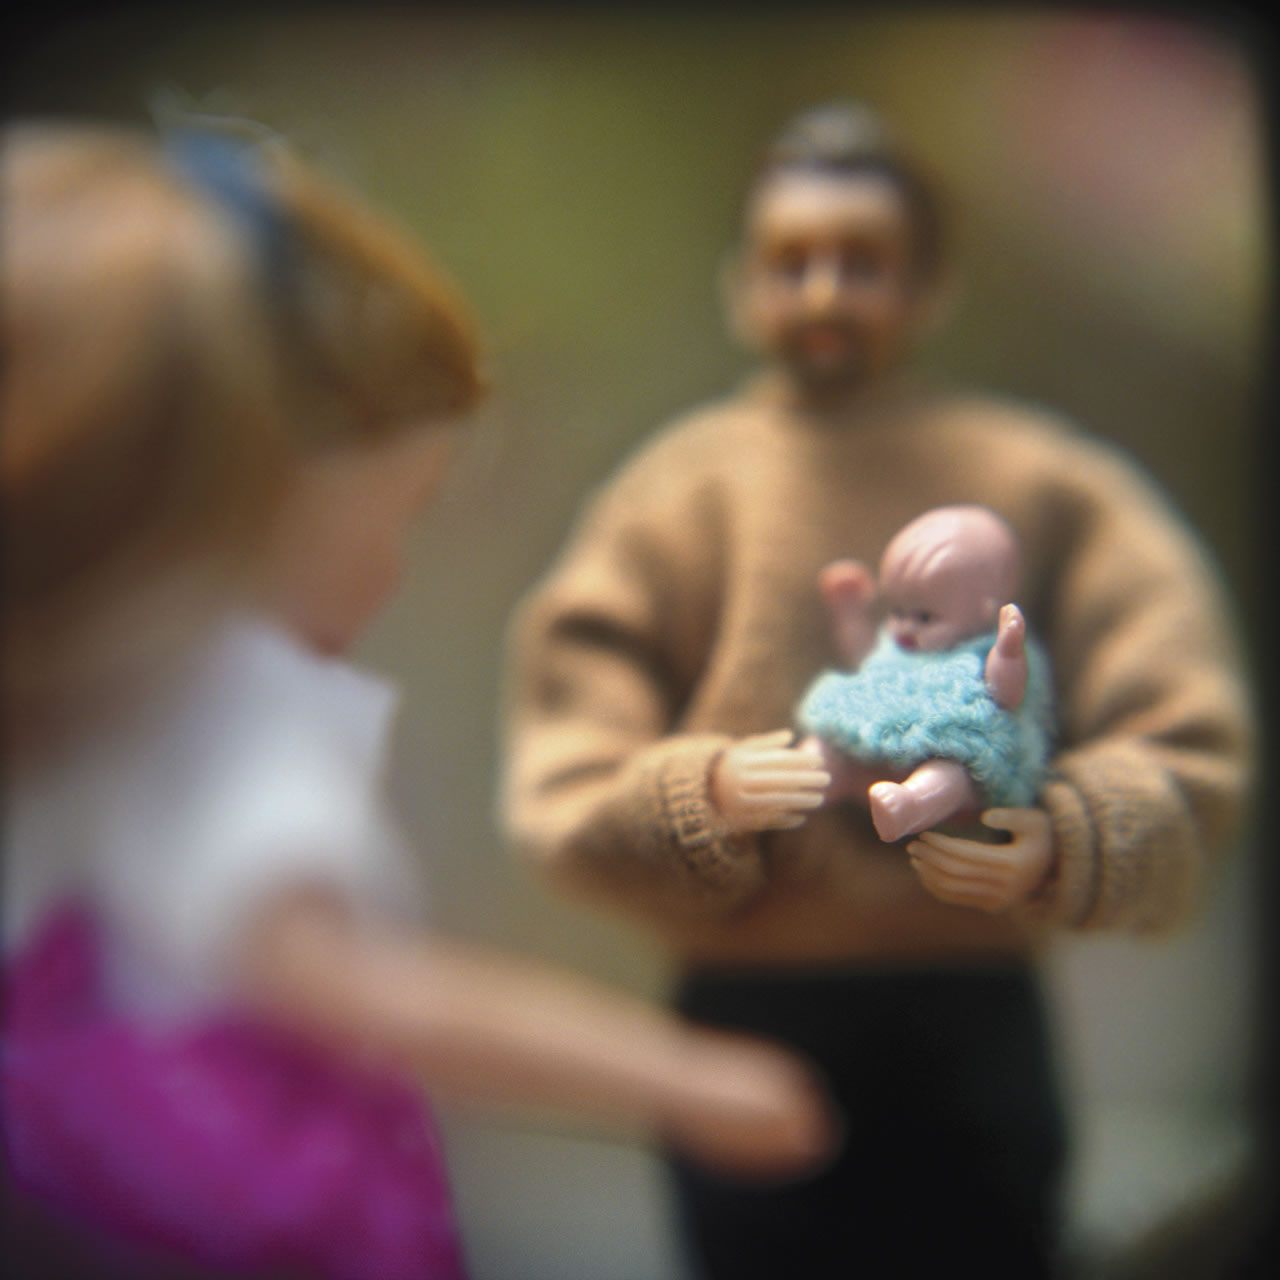 family with infant: from Hurricane Story, a series of Holga images about Hurricane Katrina